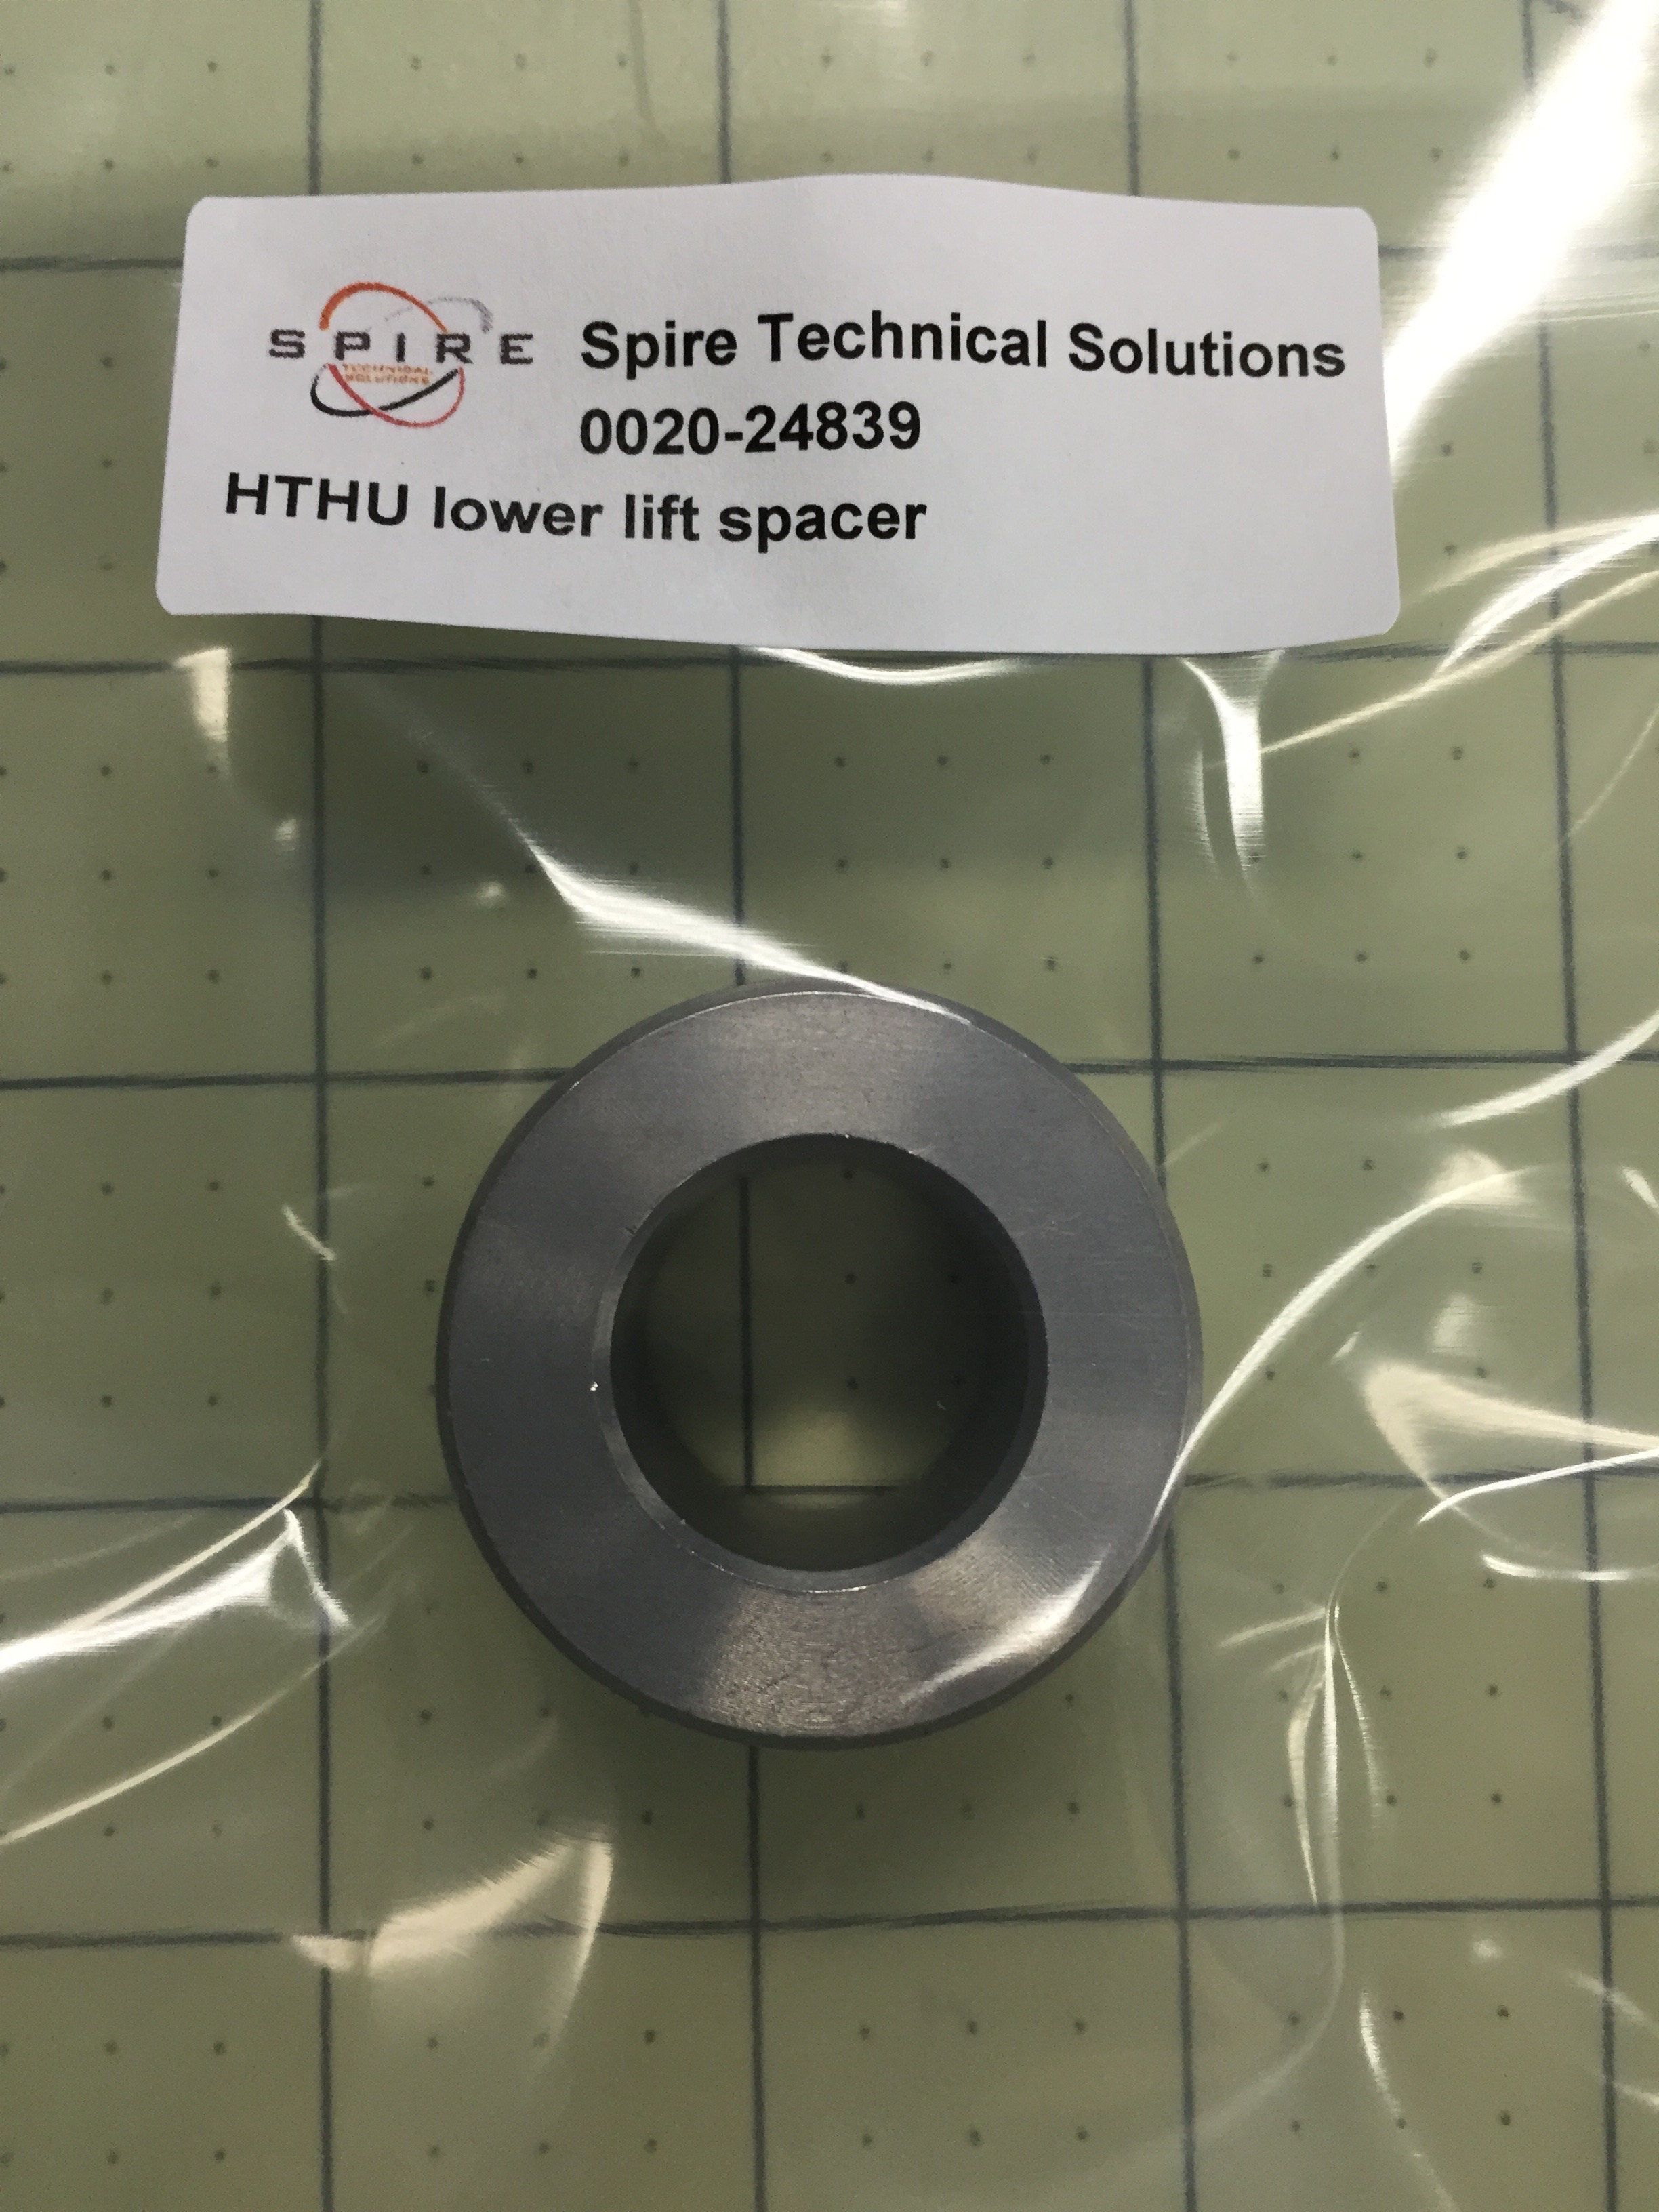 HTHU lower lift spacer